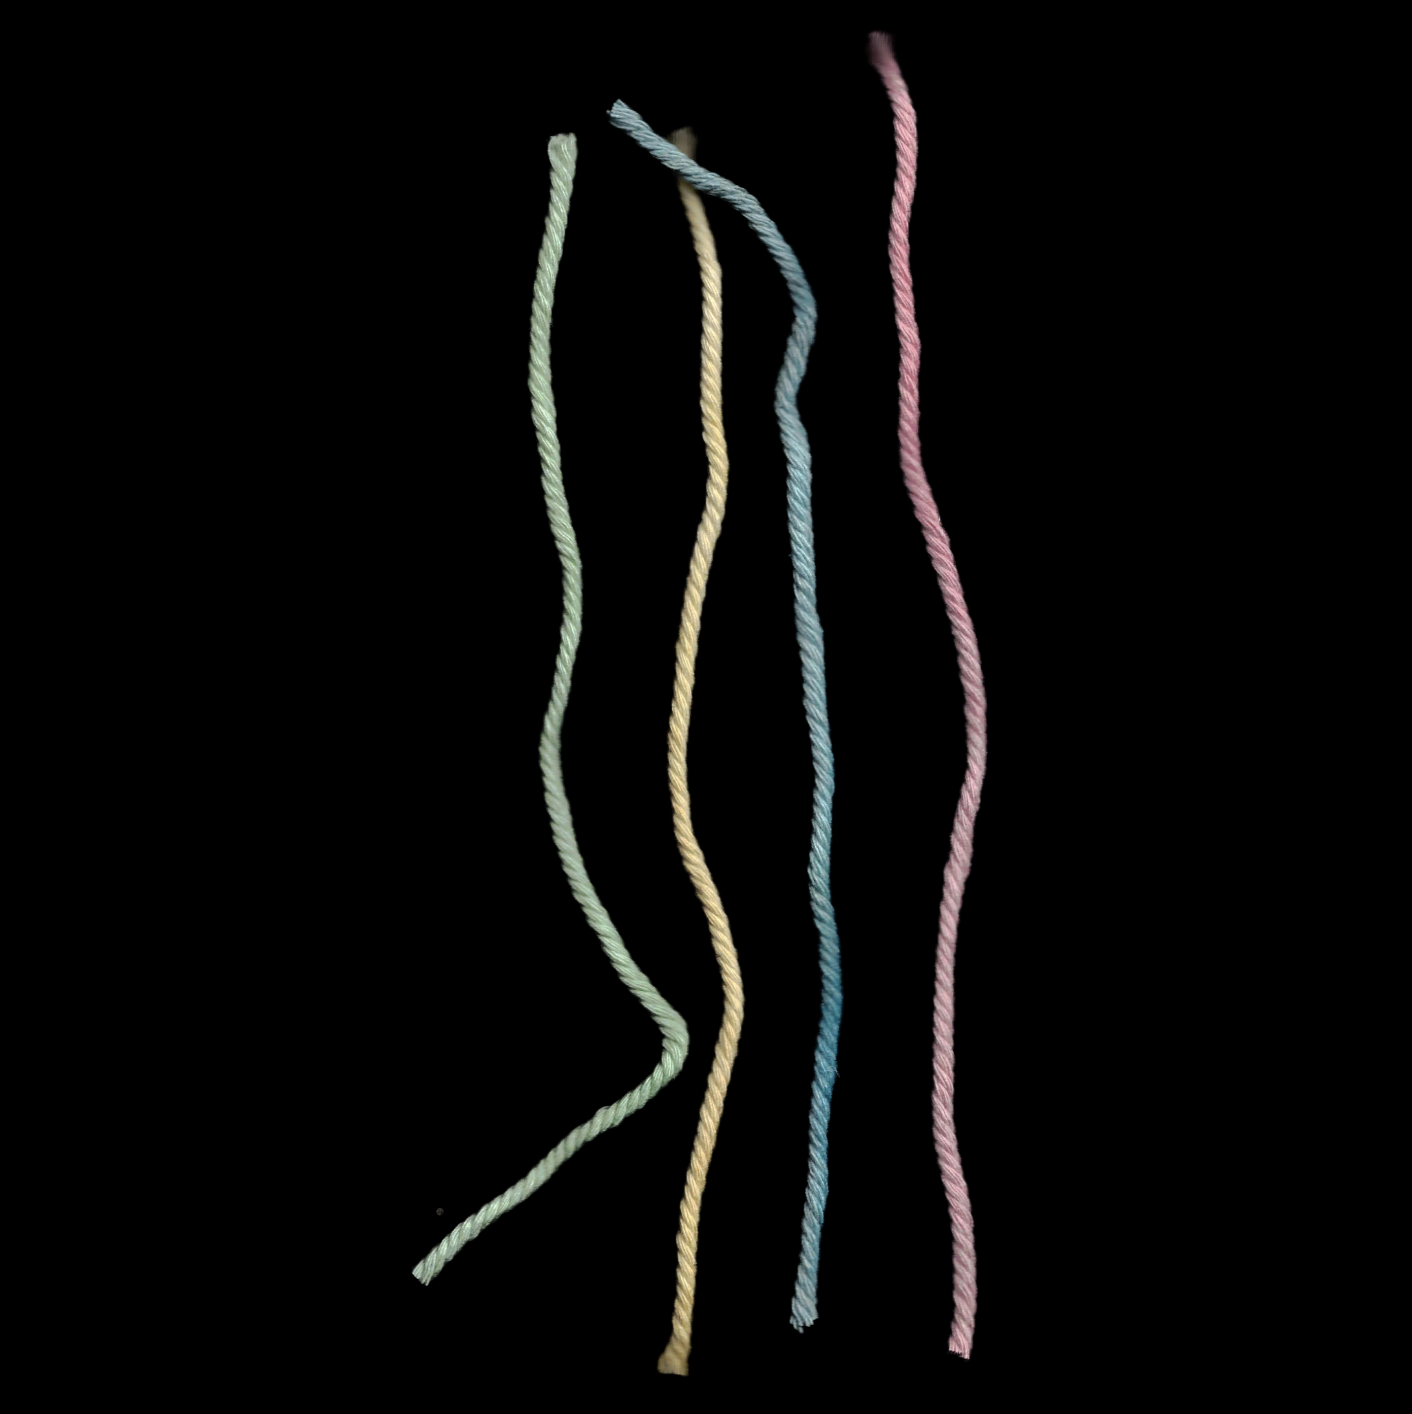 PICTURE: Different sections of unknotted threads representing pure vowels.